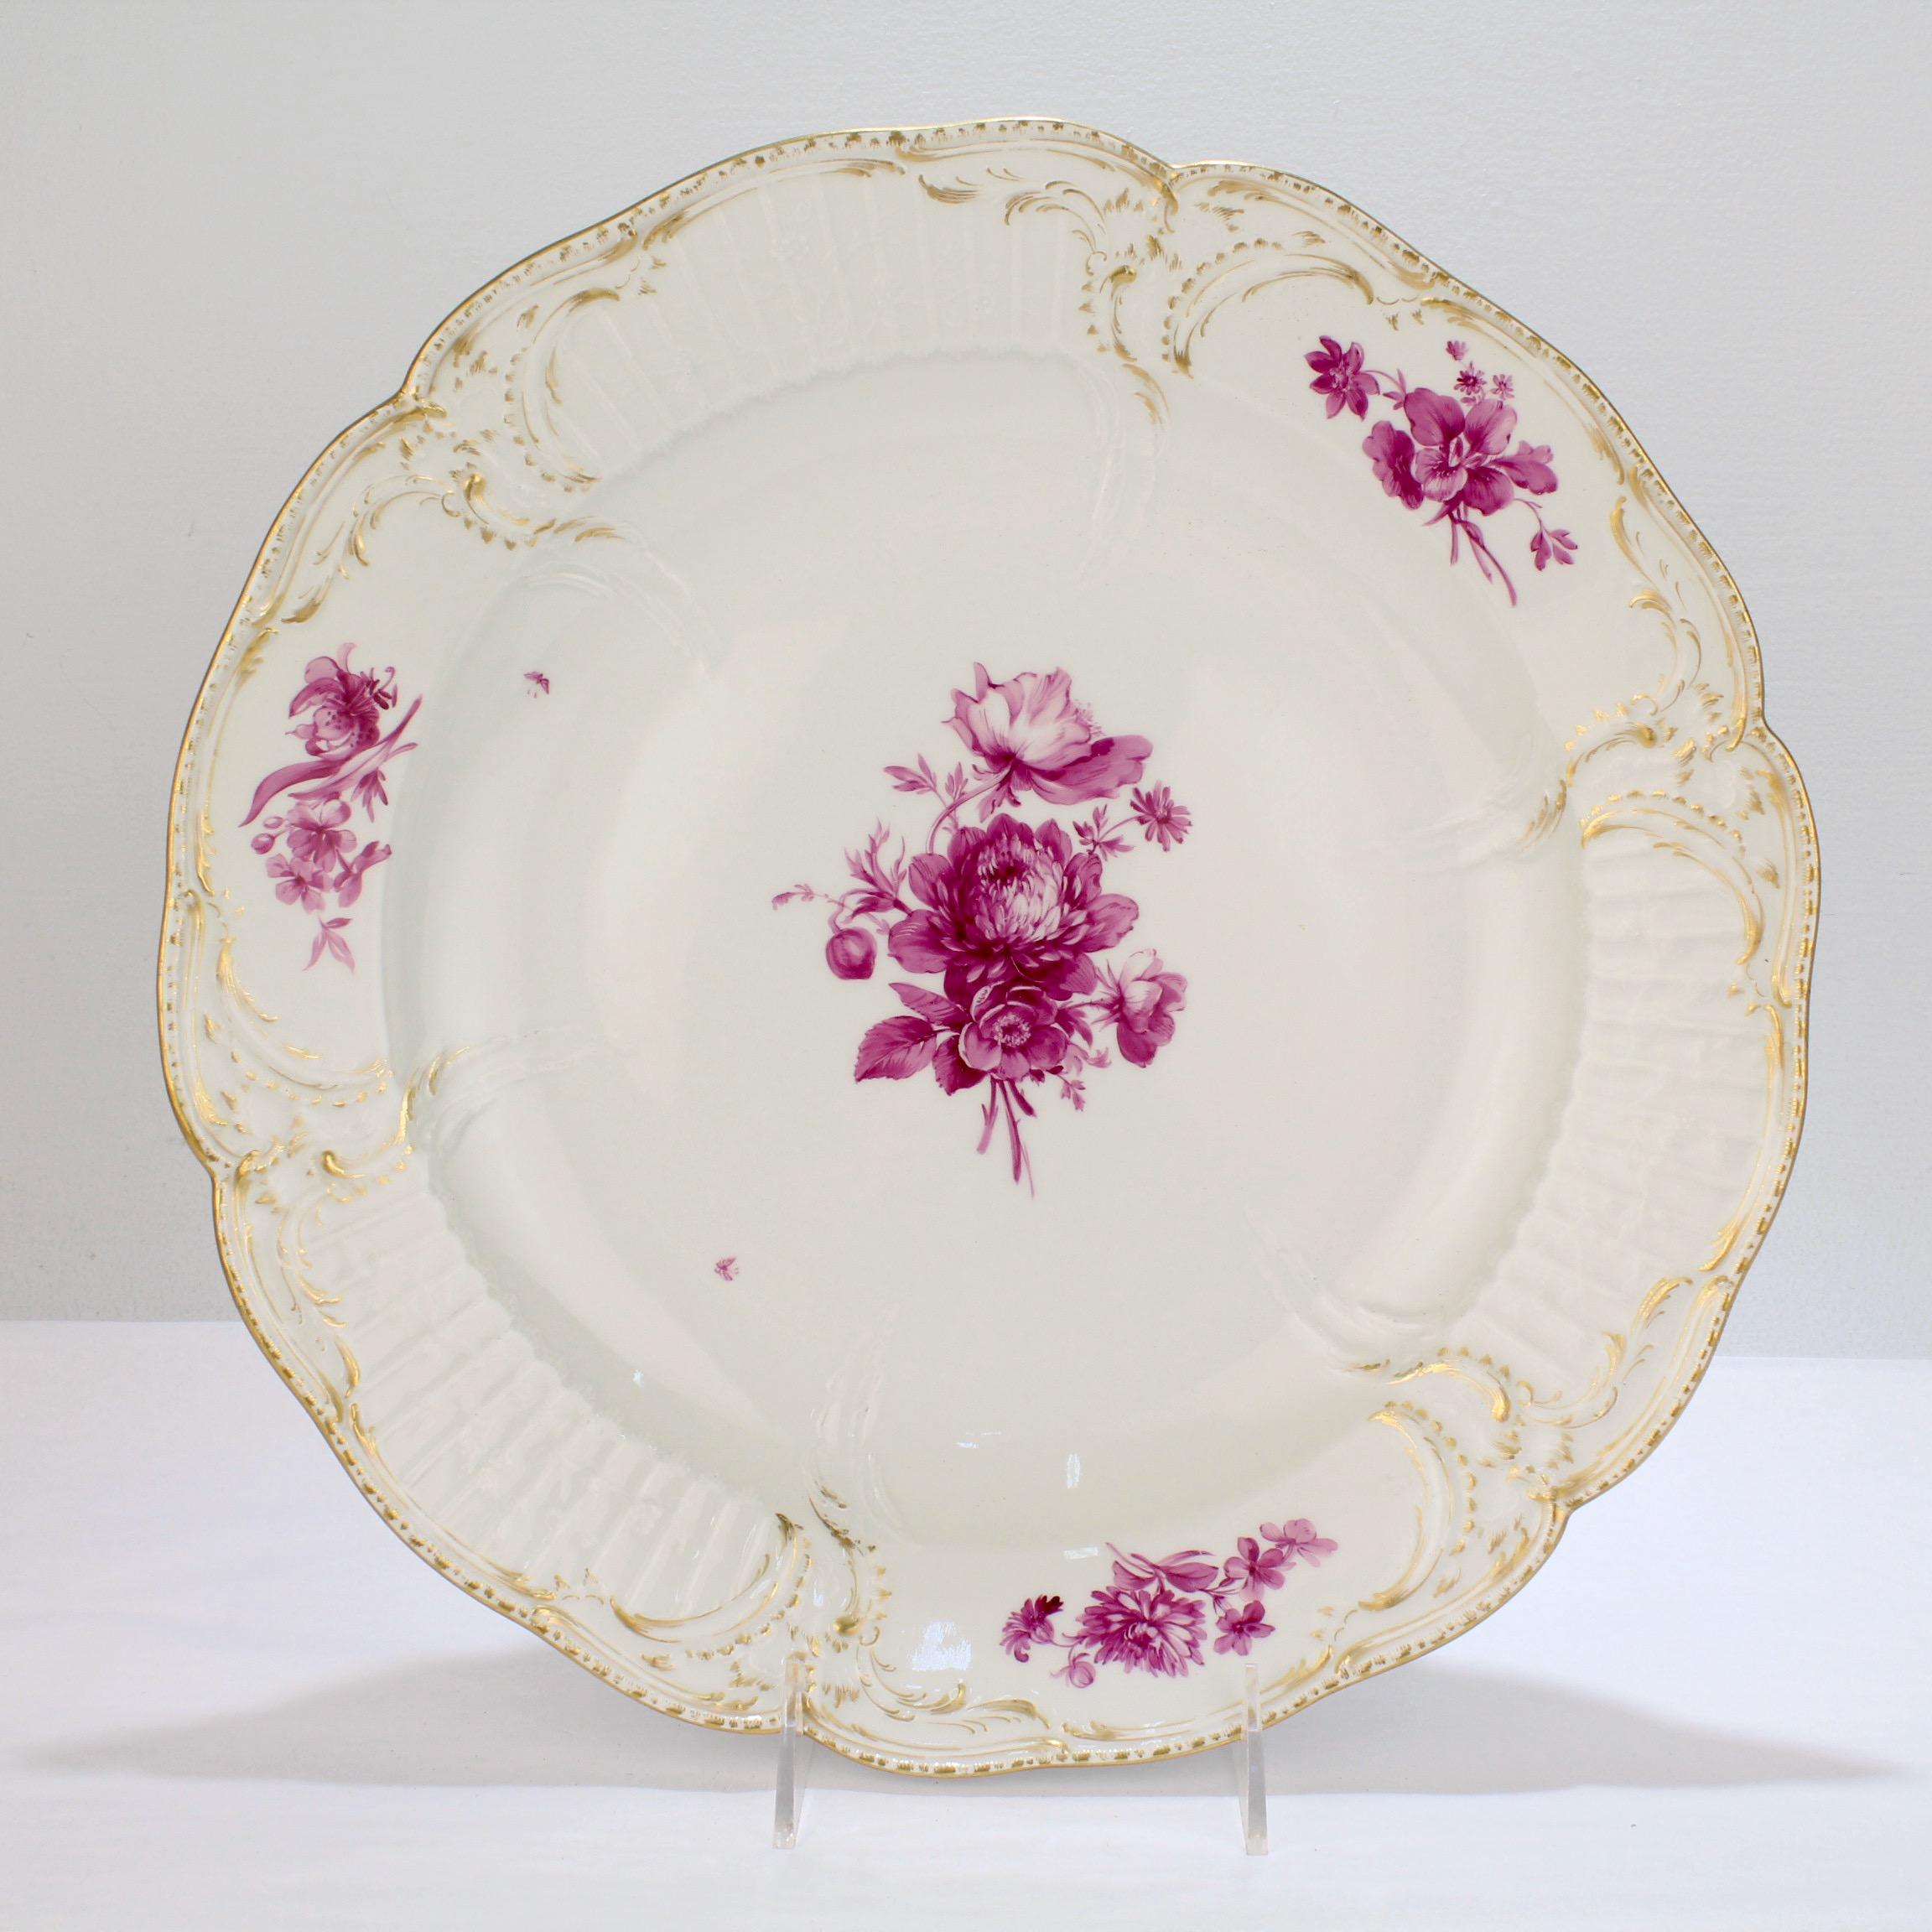 A very fine, large porcelain charger in the Reliefzierat pattern. 

By the K.P.M. Royal Berlin Porcelain Manufactory. 

Modeled after the services supplied to Frederick the Great of Prussia for his Potsdam palace.

With a large hand-painted